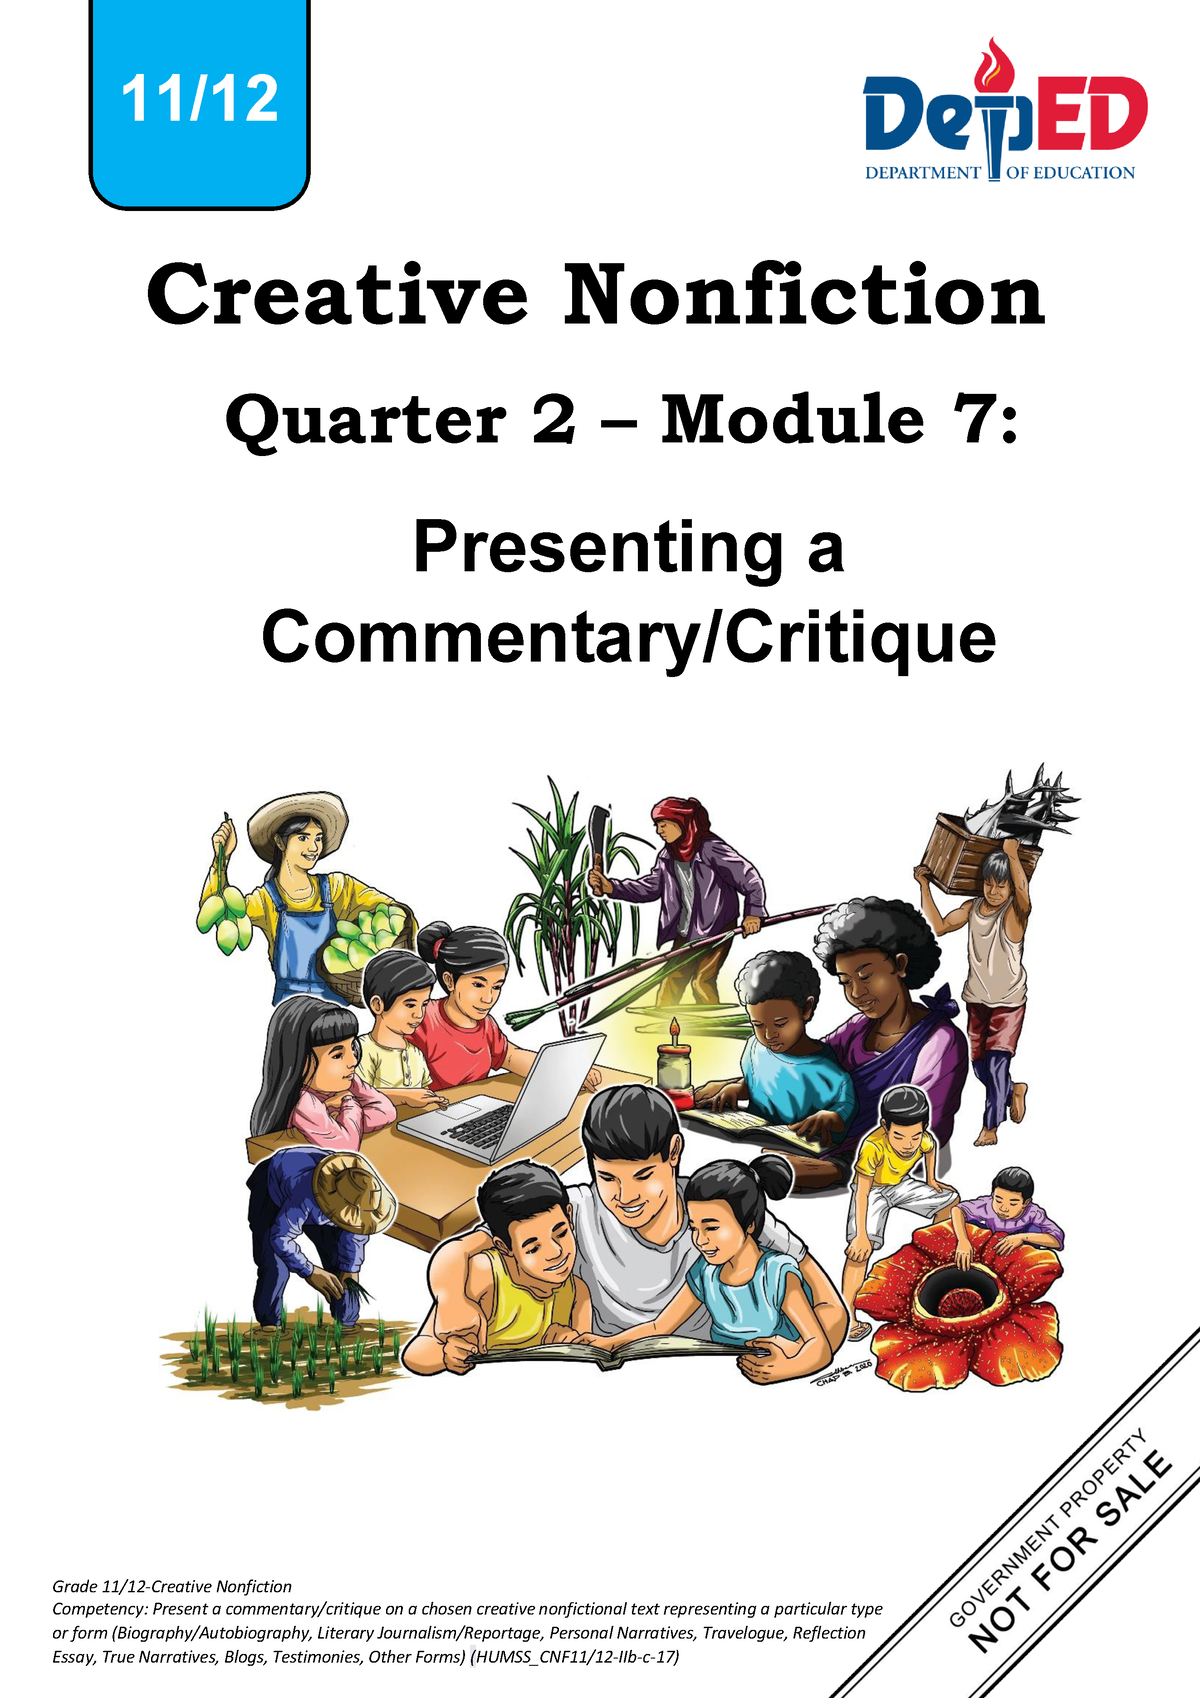 Cnf Melc7 Final Field Validated 1 1 Grade 1112 Creative Nonfiction